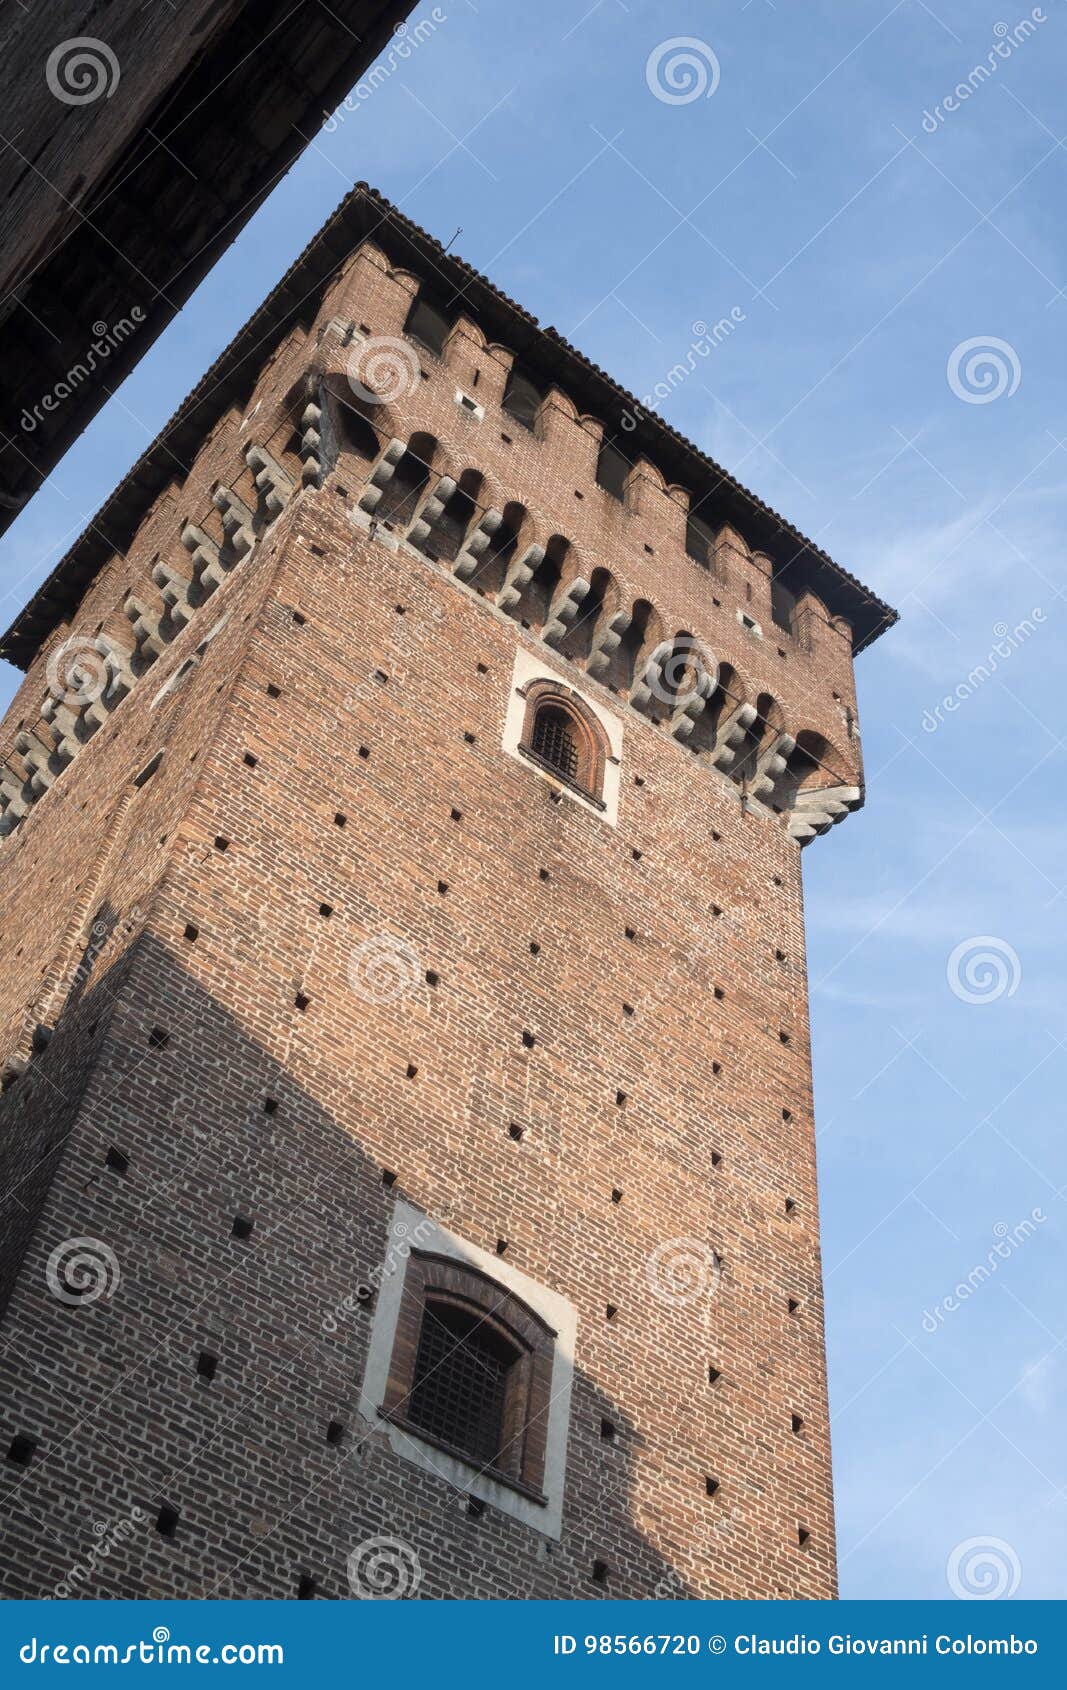 sant`angelo lodigiano italy: medieval castle